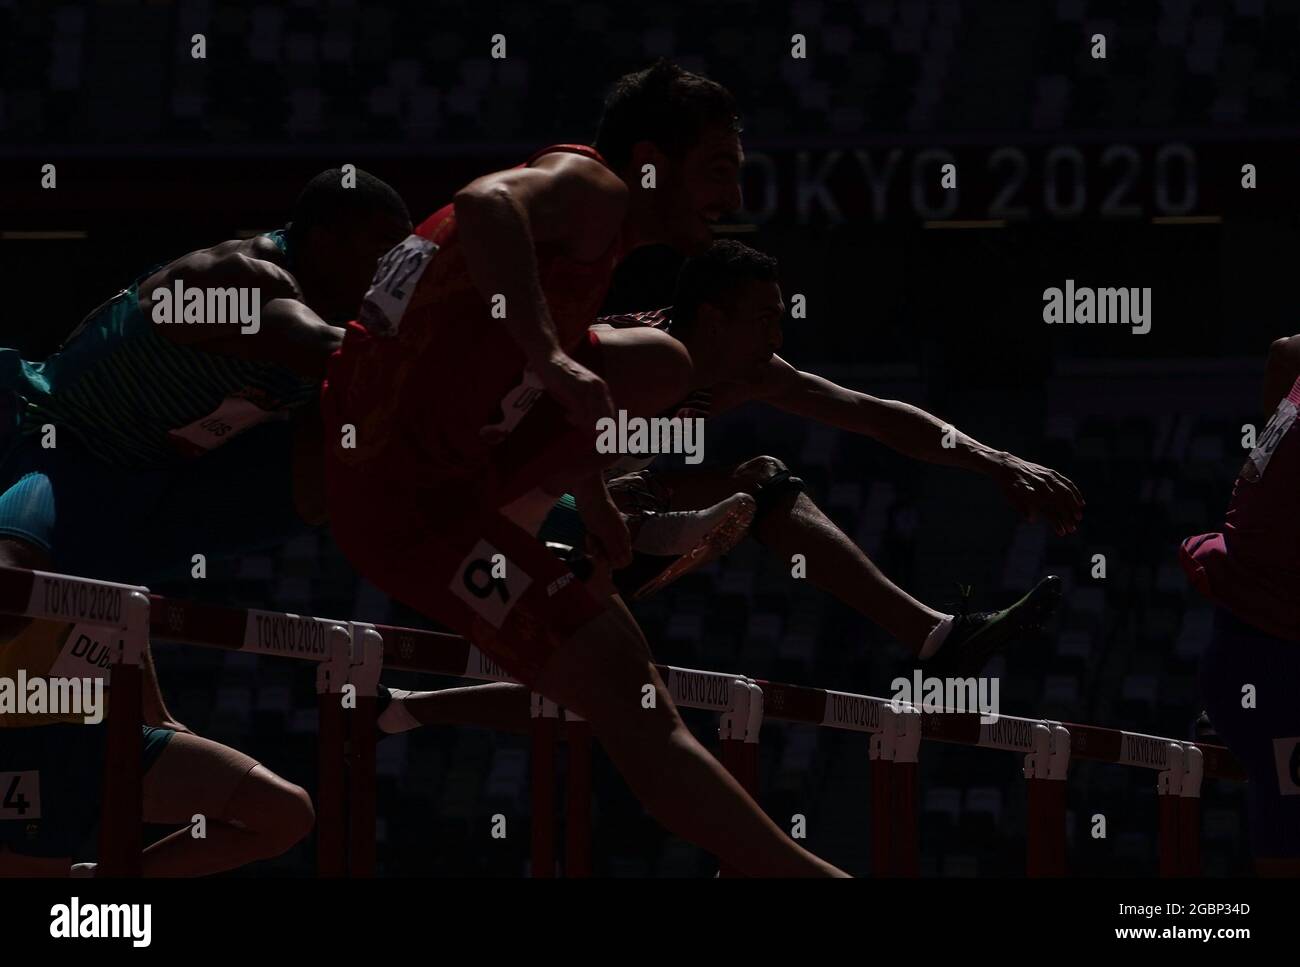 Tokyo, Japan. 5th Aug, 2021. Jorge Urena of Spain competes during the Men's Decathlon 110m Hurdles at the Tokyo 2020 Olympic Games in Tokyo, Japan, Aug. 5, 2021. Credit: Lui Siu Wai/Xinhua/Alamy Live News Stock Photo